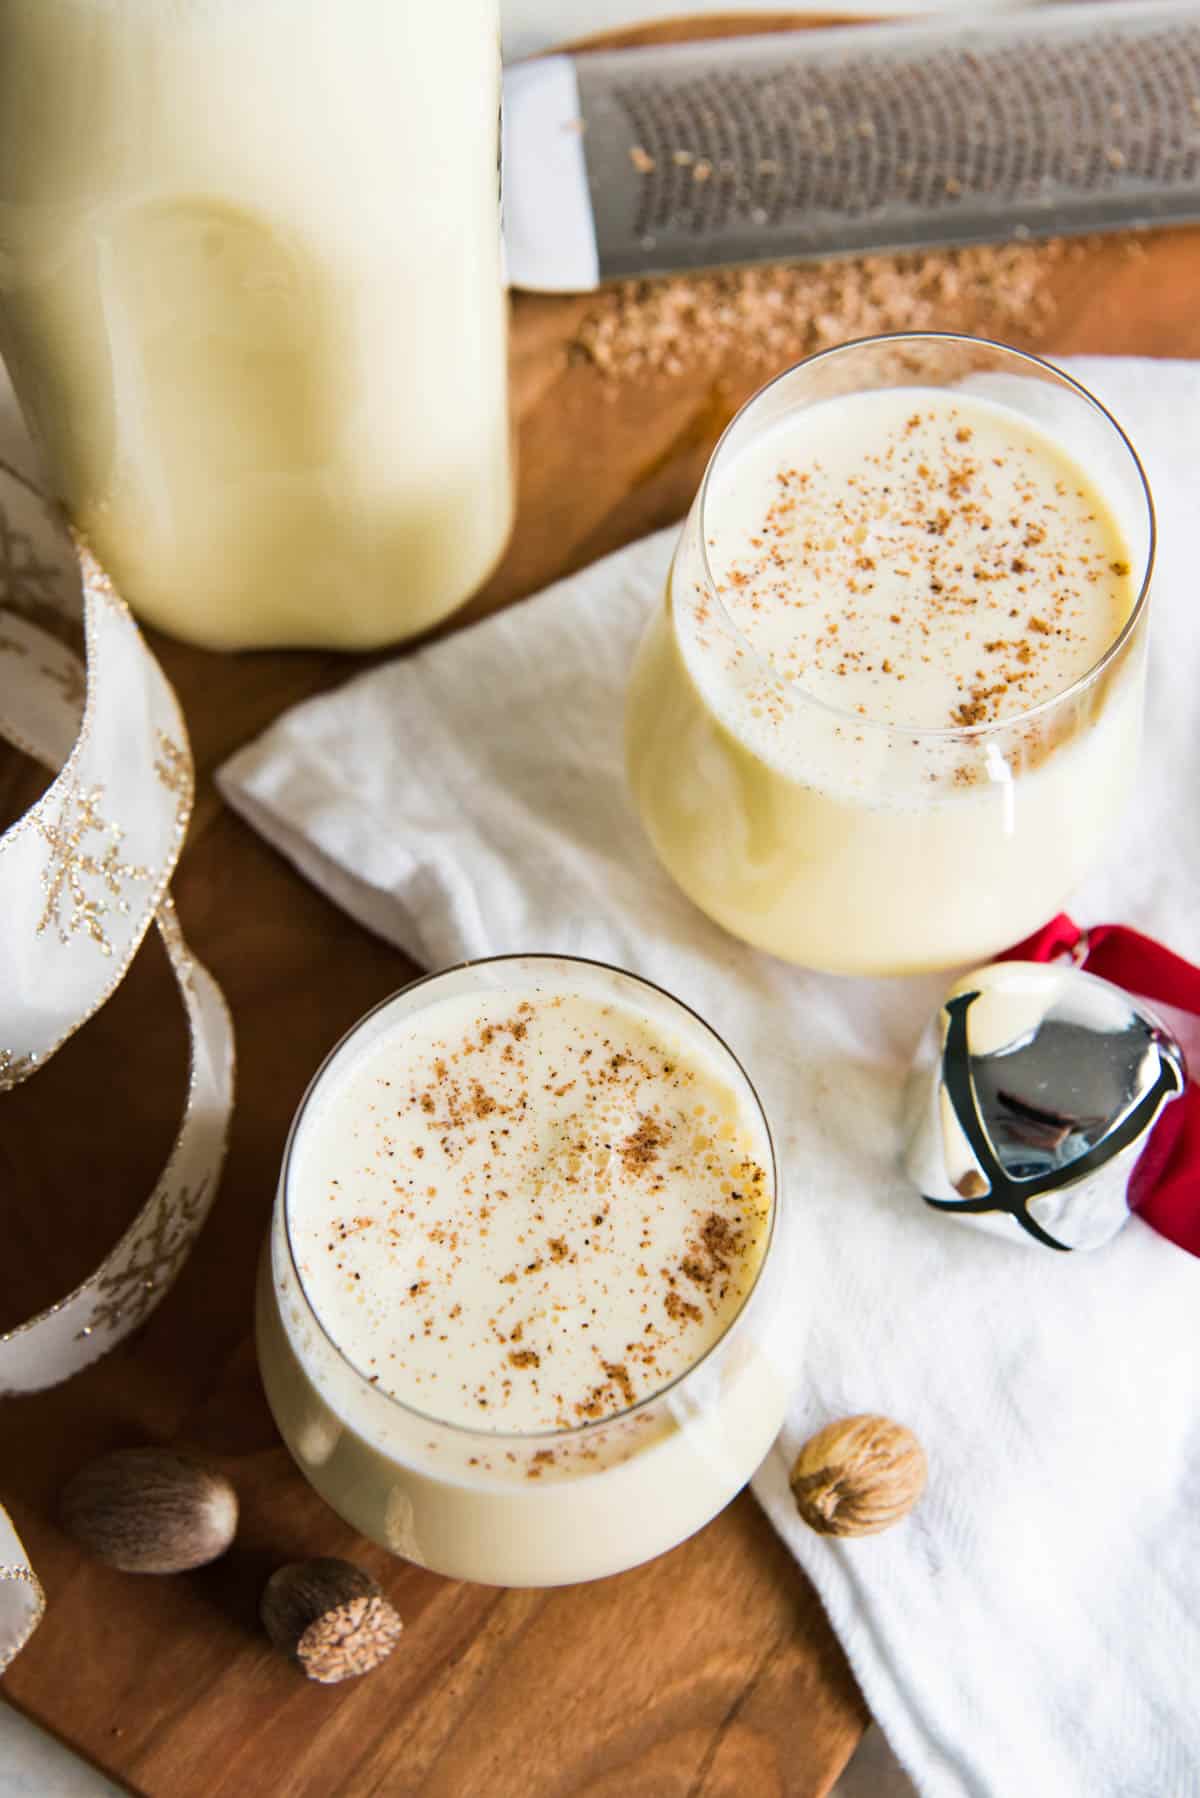 Top view of two glasses of nutmeg topped with grated nutmeg with a bell  on a white towel, a gold ribbon and a bottle of eggnog also in the frame.